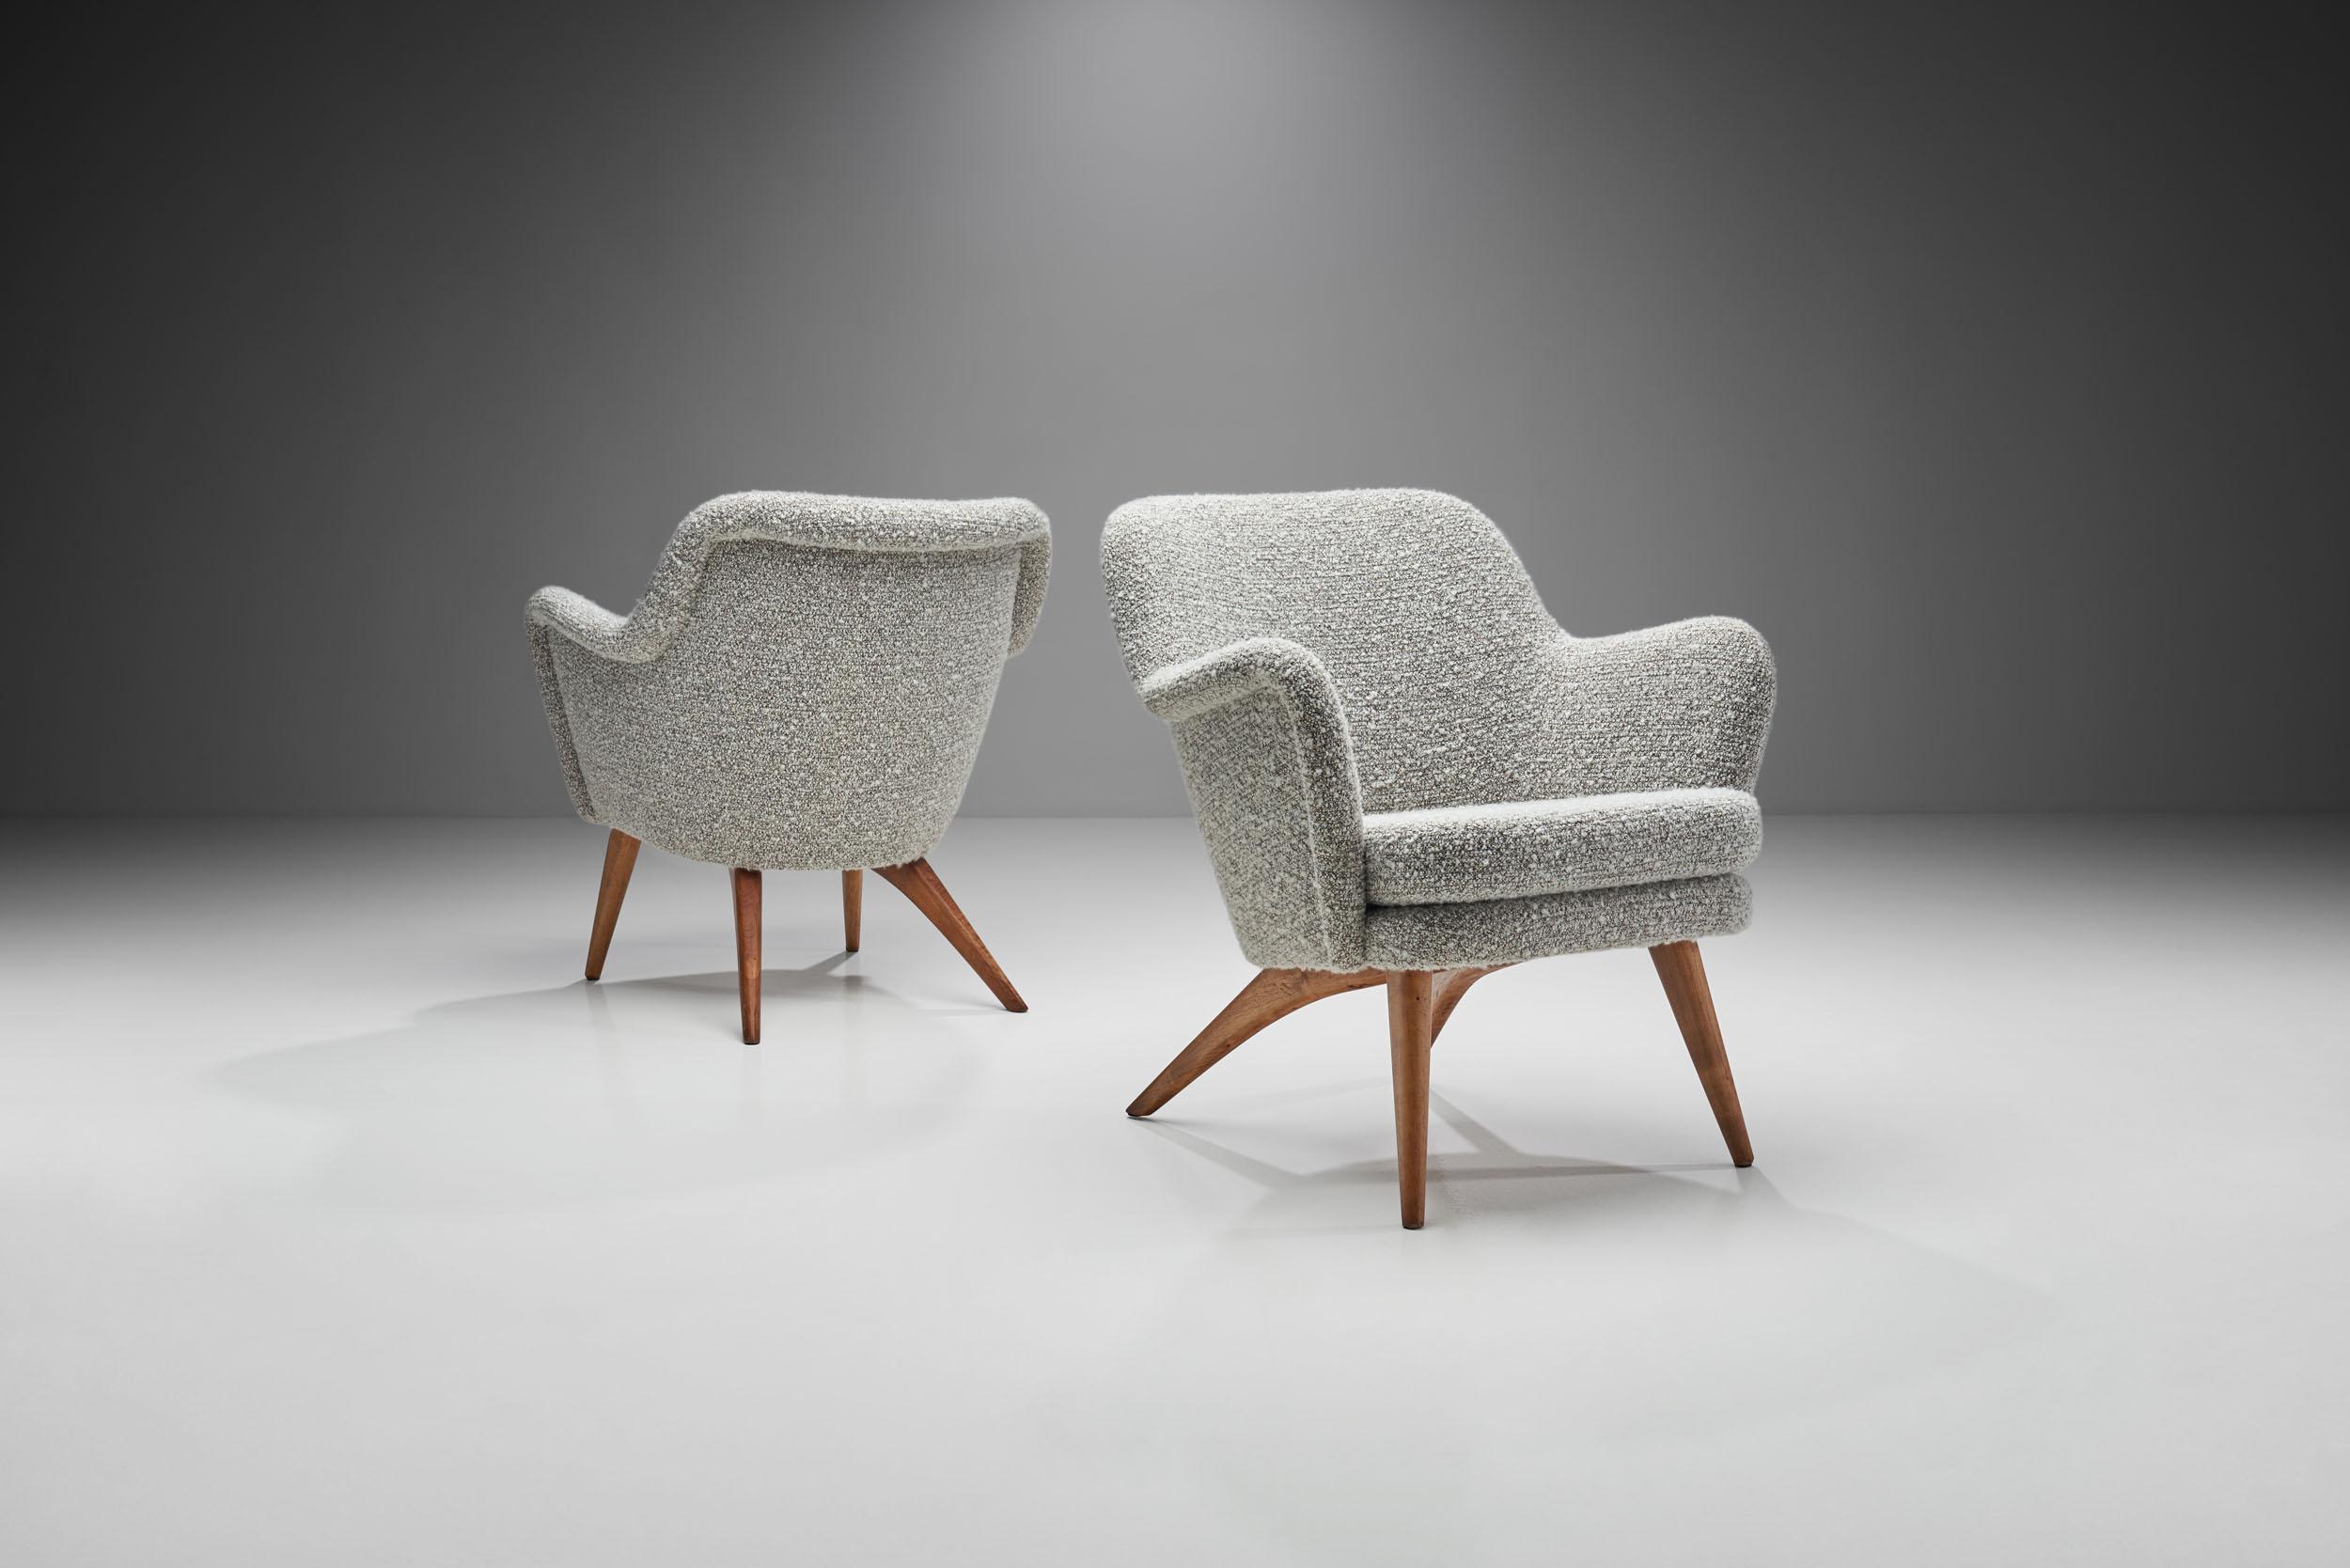 These “Pedro” armchairs show the homely curviness that defined the design of the 1950s. Hiort af Ornäs developed the model for his own furniture company, Puunveisto Oy.

The Pedro model has a soft, sculptural shape paired with an ergonomic